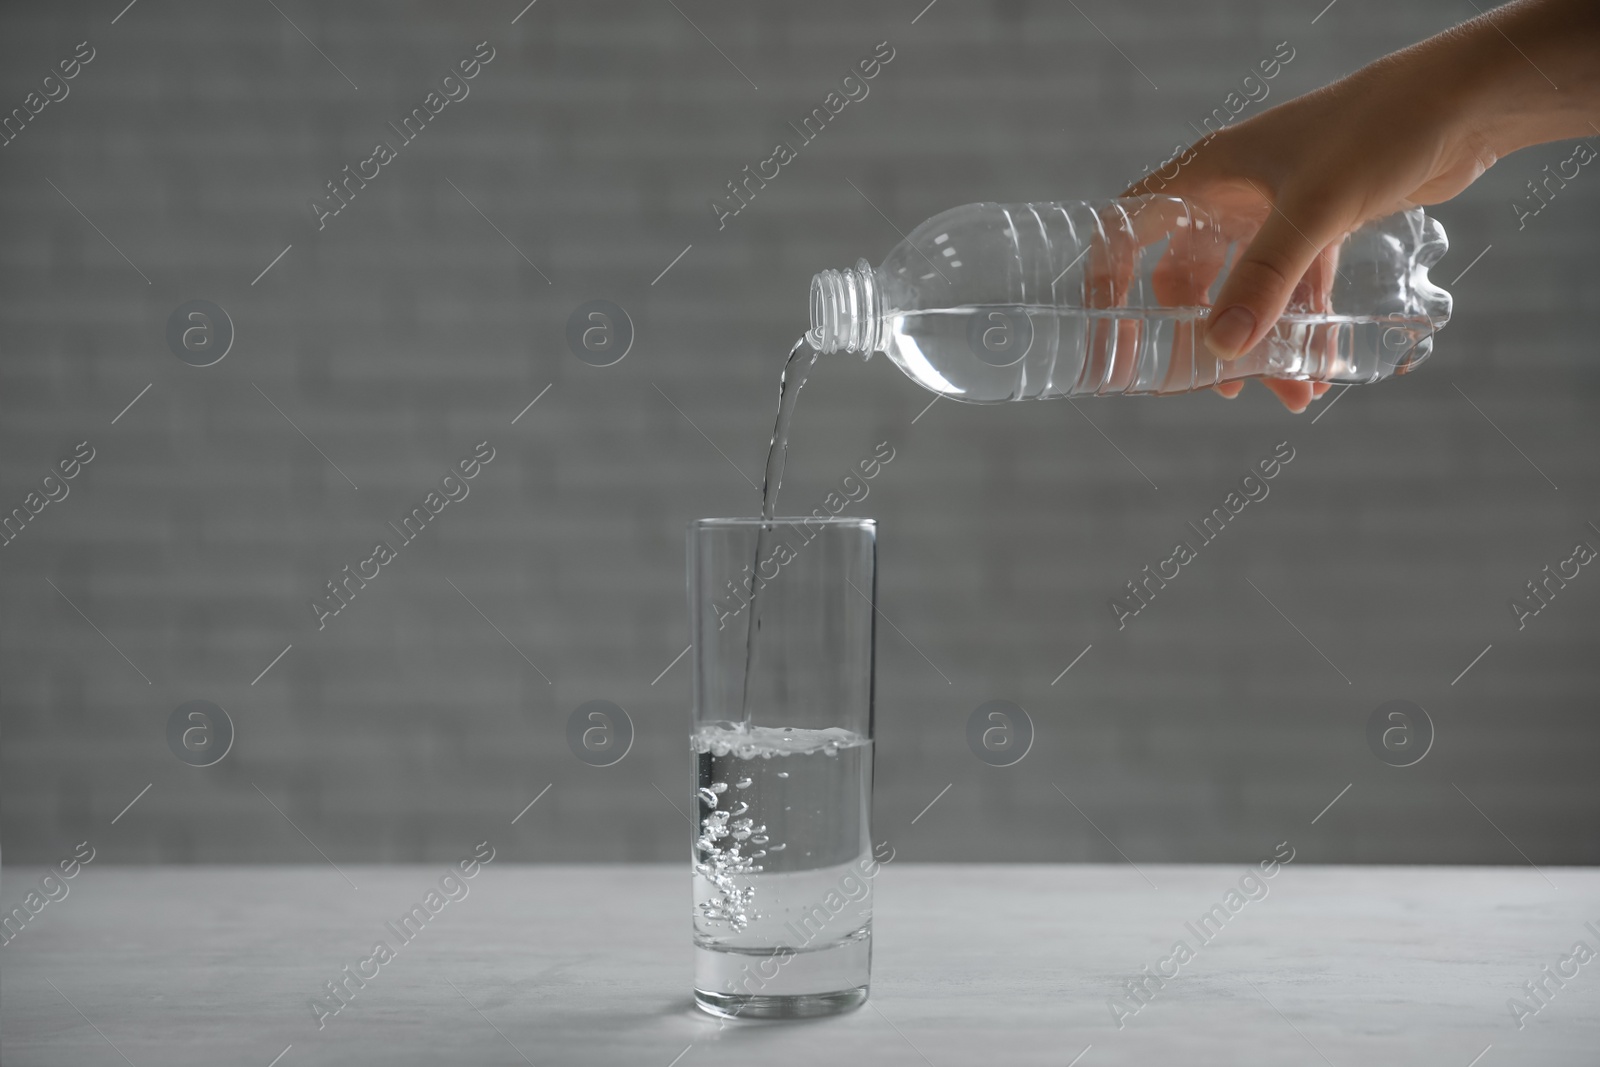 Photo of Woman pouring water from bottle into glass on table against blurred background, closeup